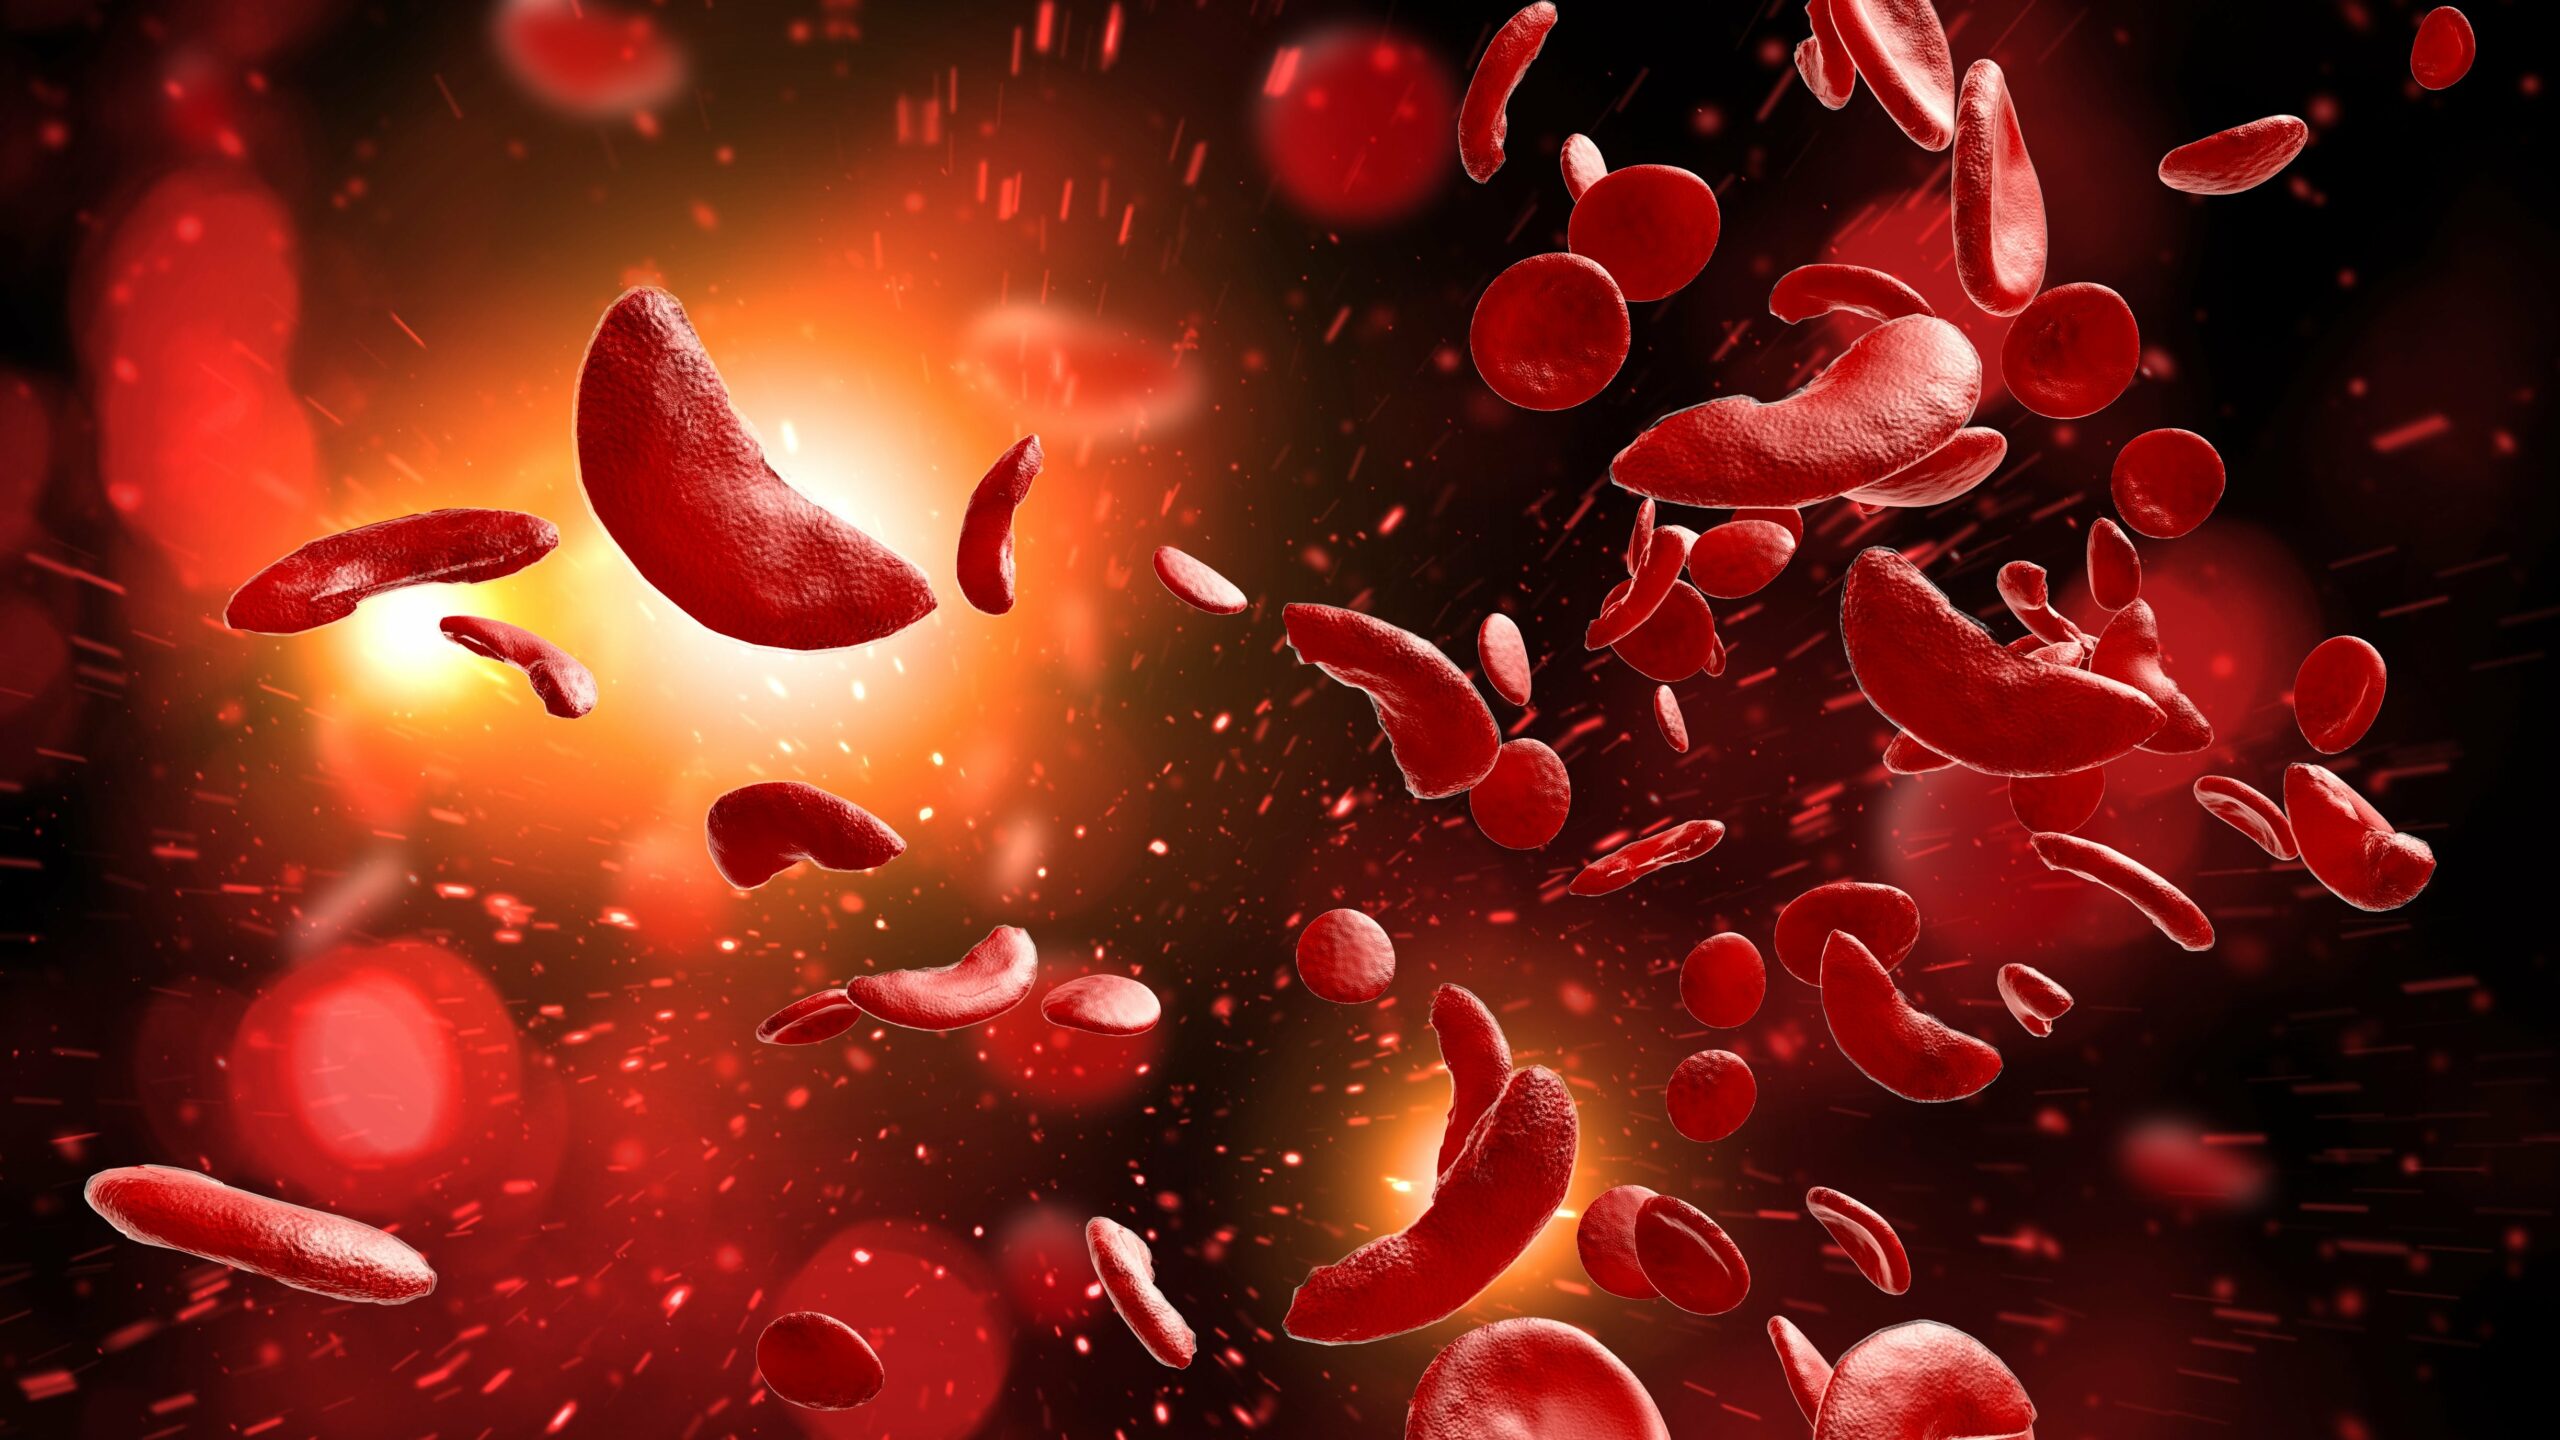 HO-1 Levels Elevated in Children Versus Adults with Sickle Cell Disease